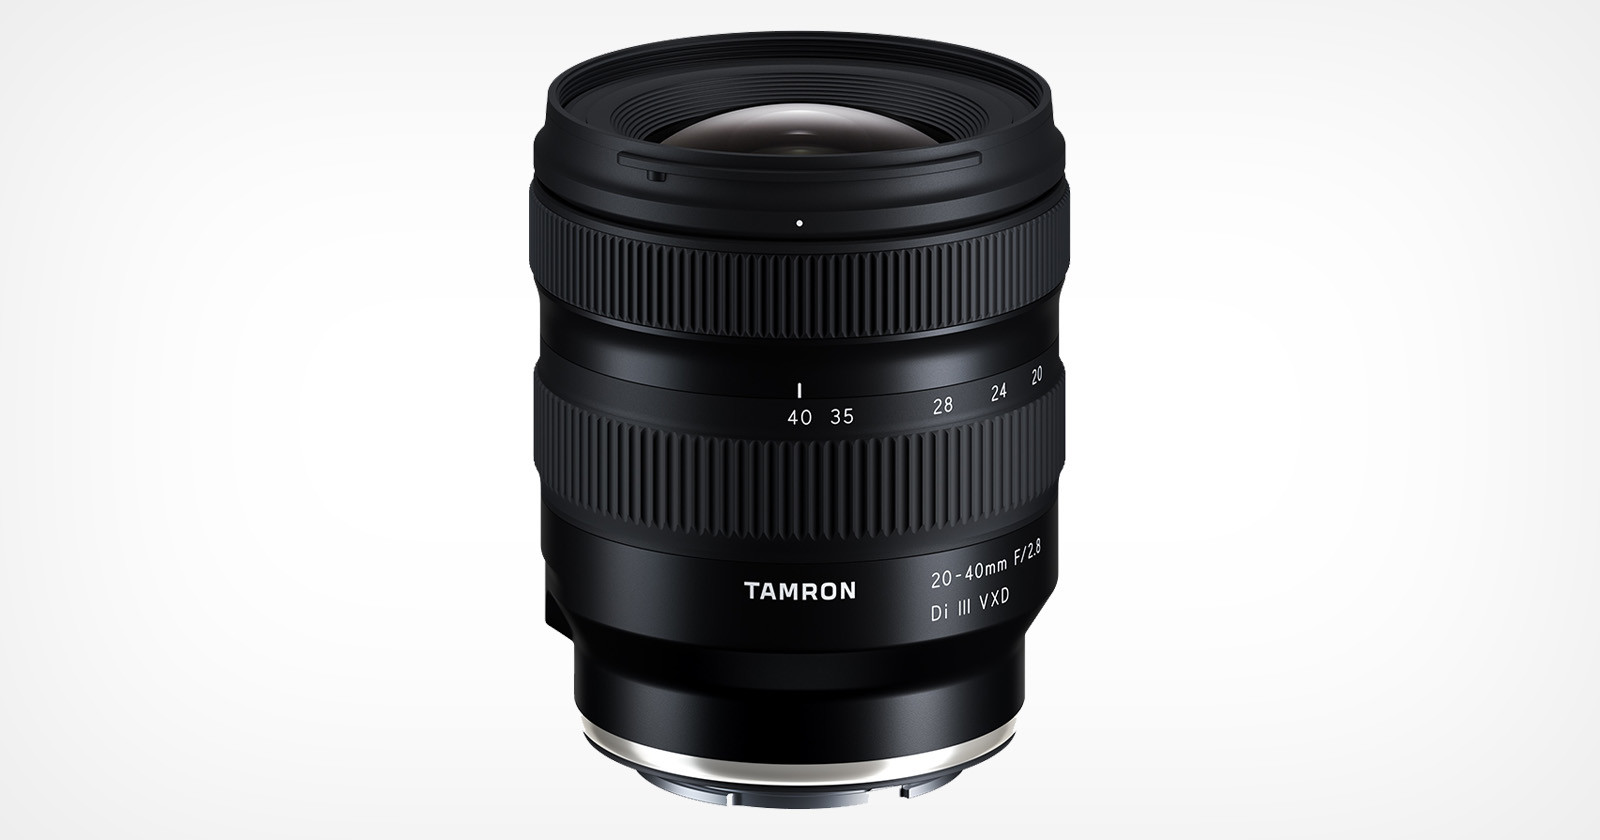 Tamron is Developing a 20-40mm f/2.8 Di III VXD Lens for Sony E-Mount